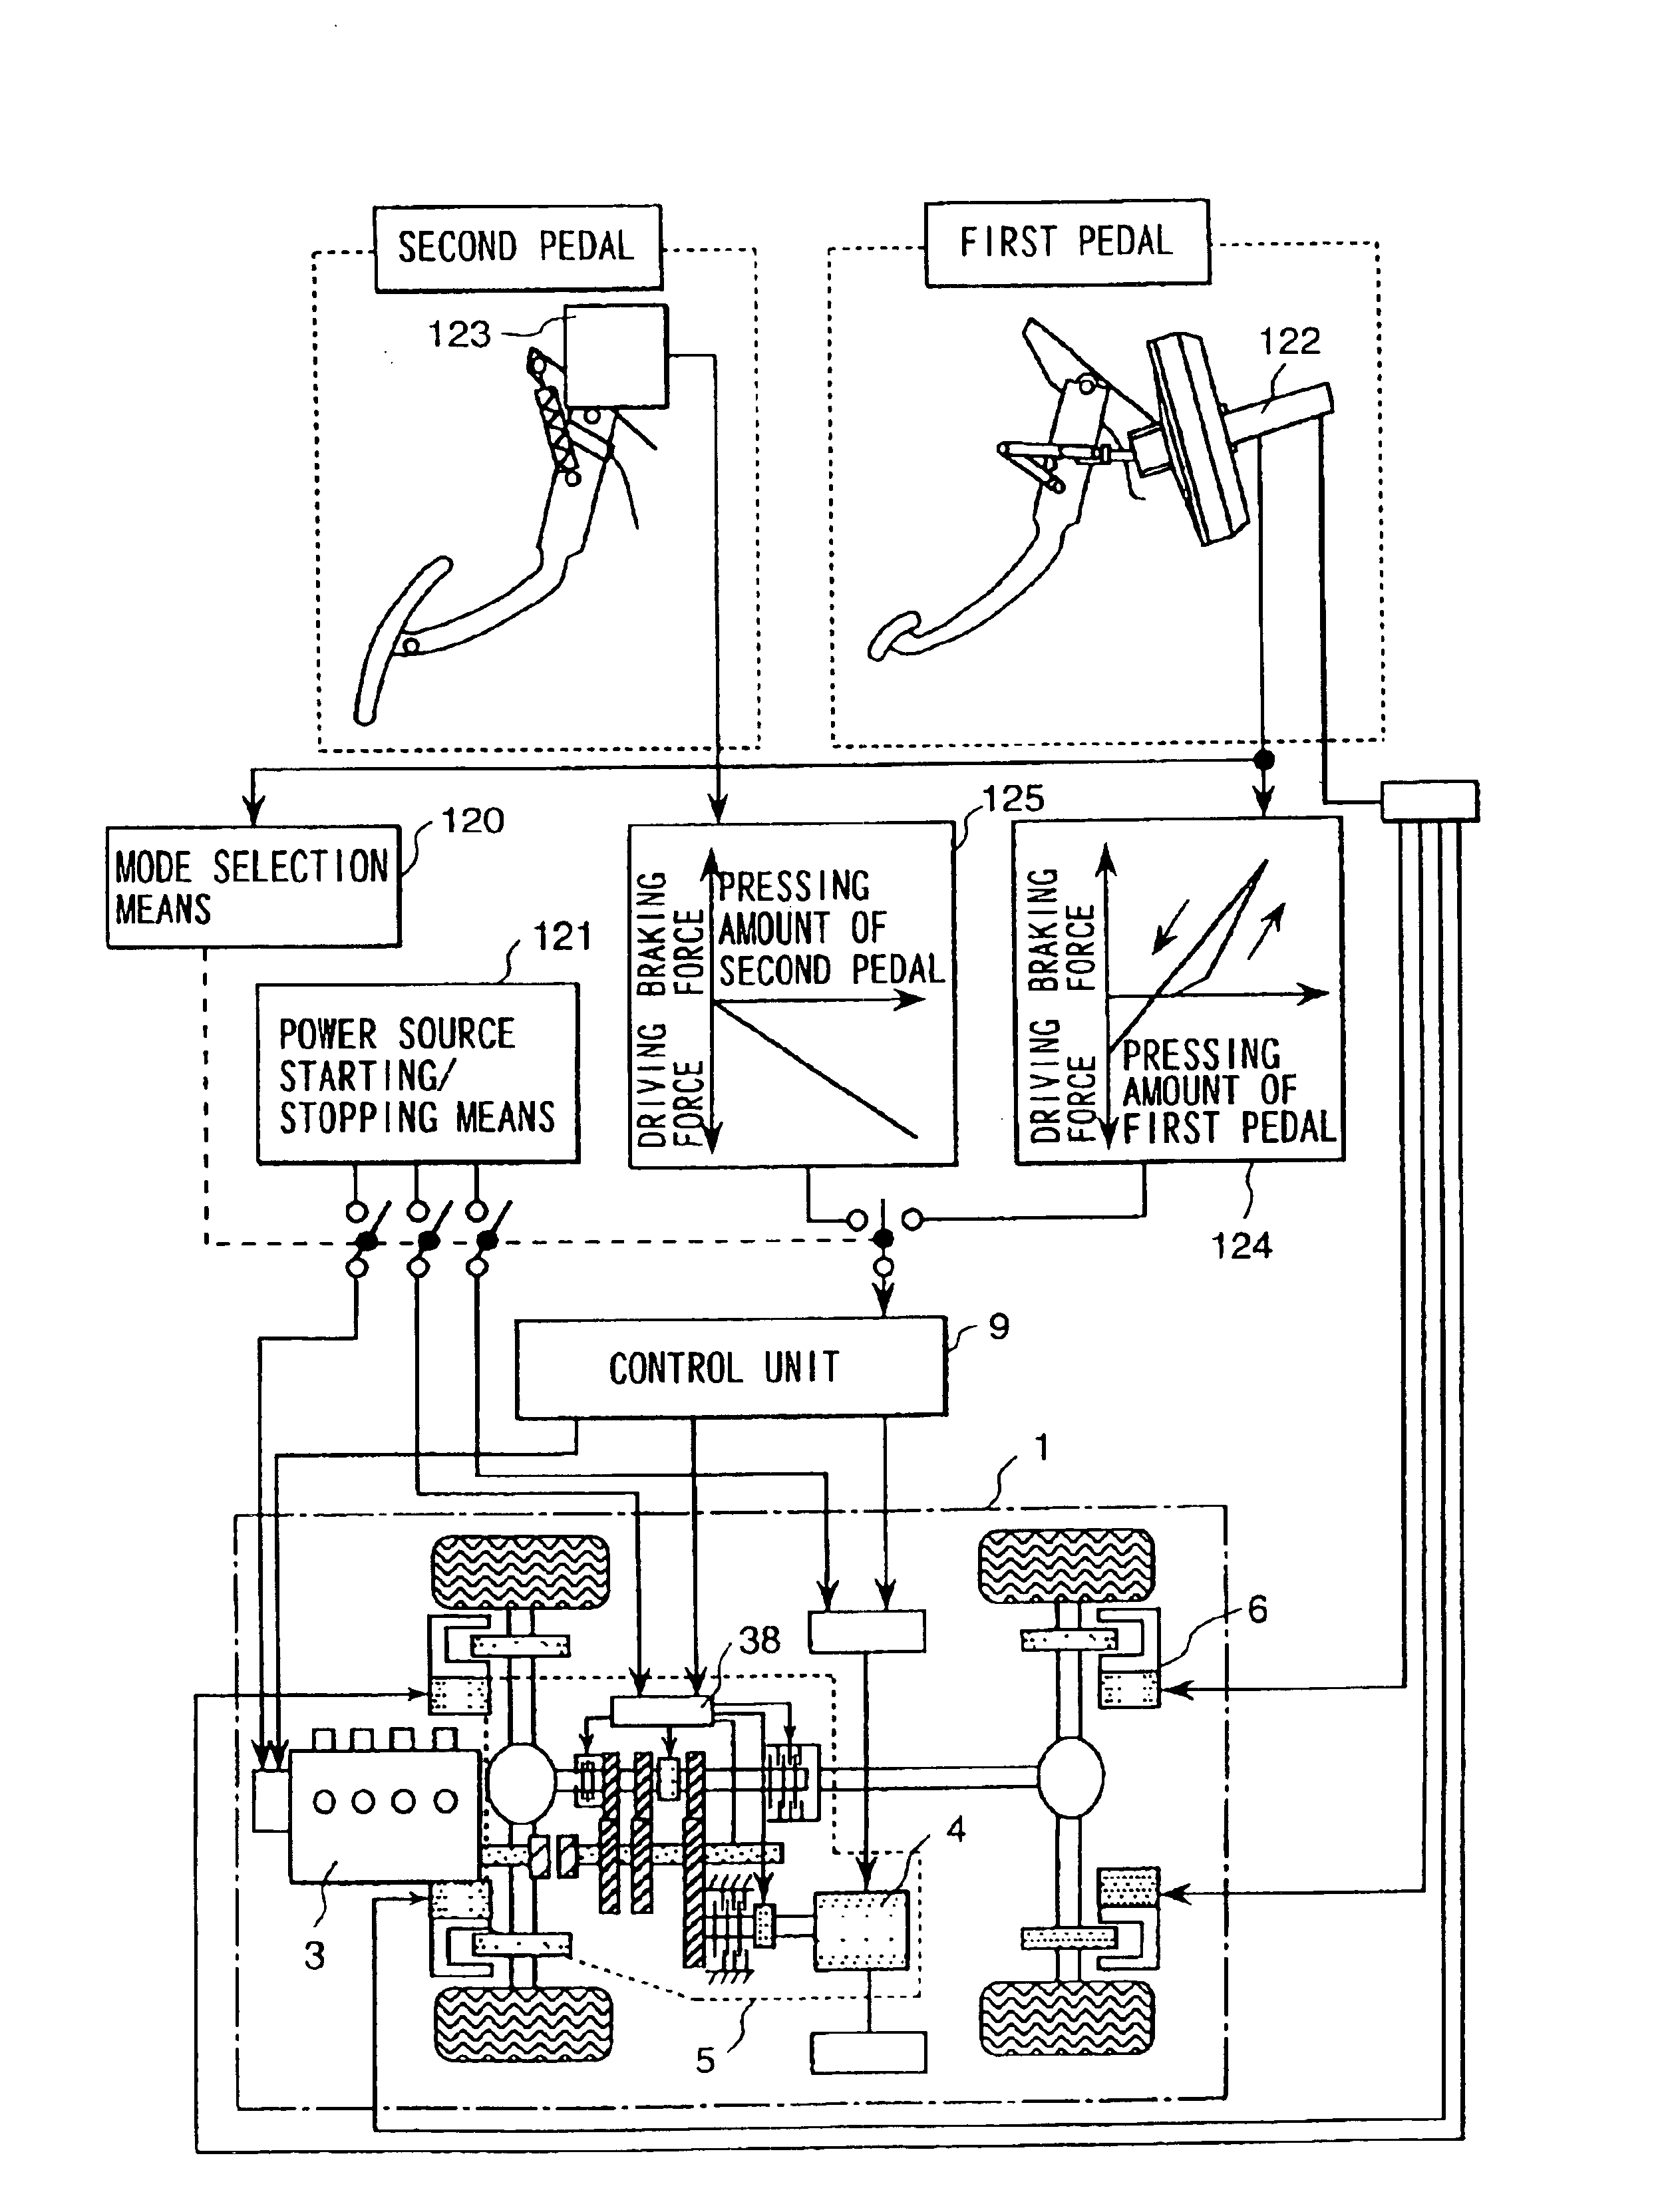 Apparatus for controlling run of a car, and car using the apparatus